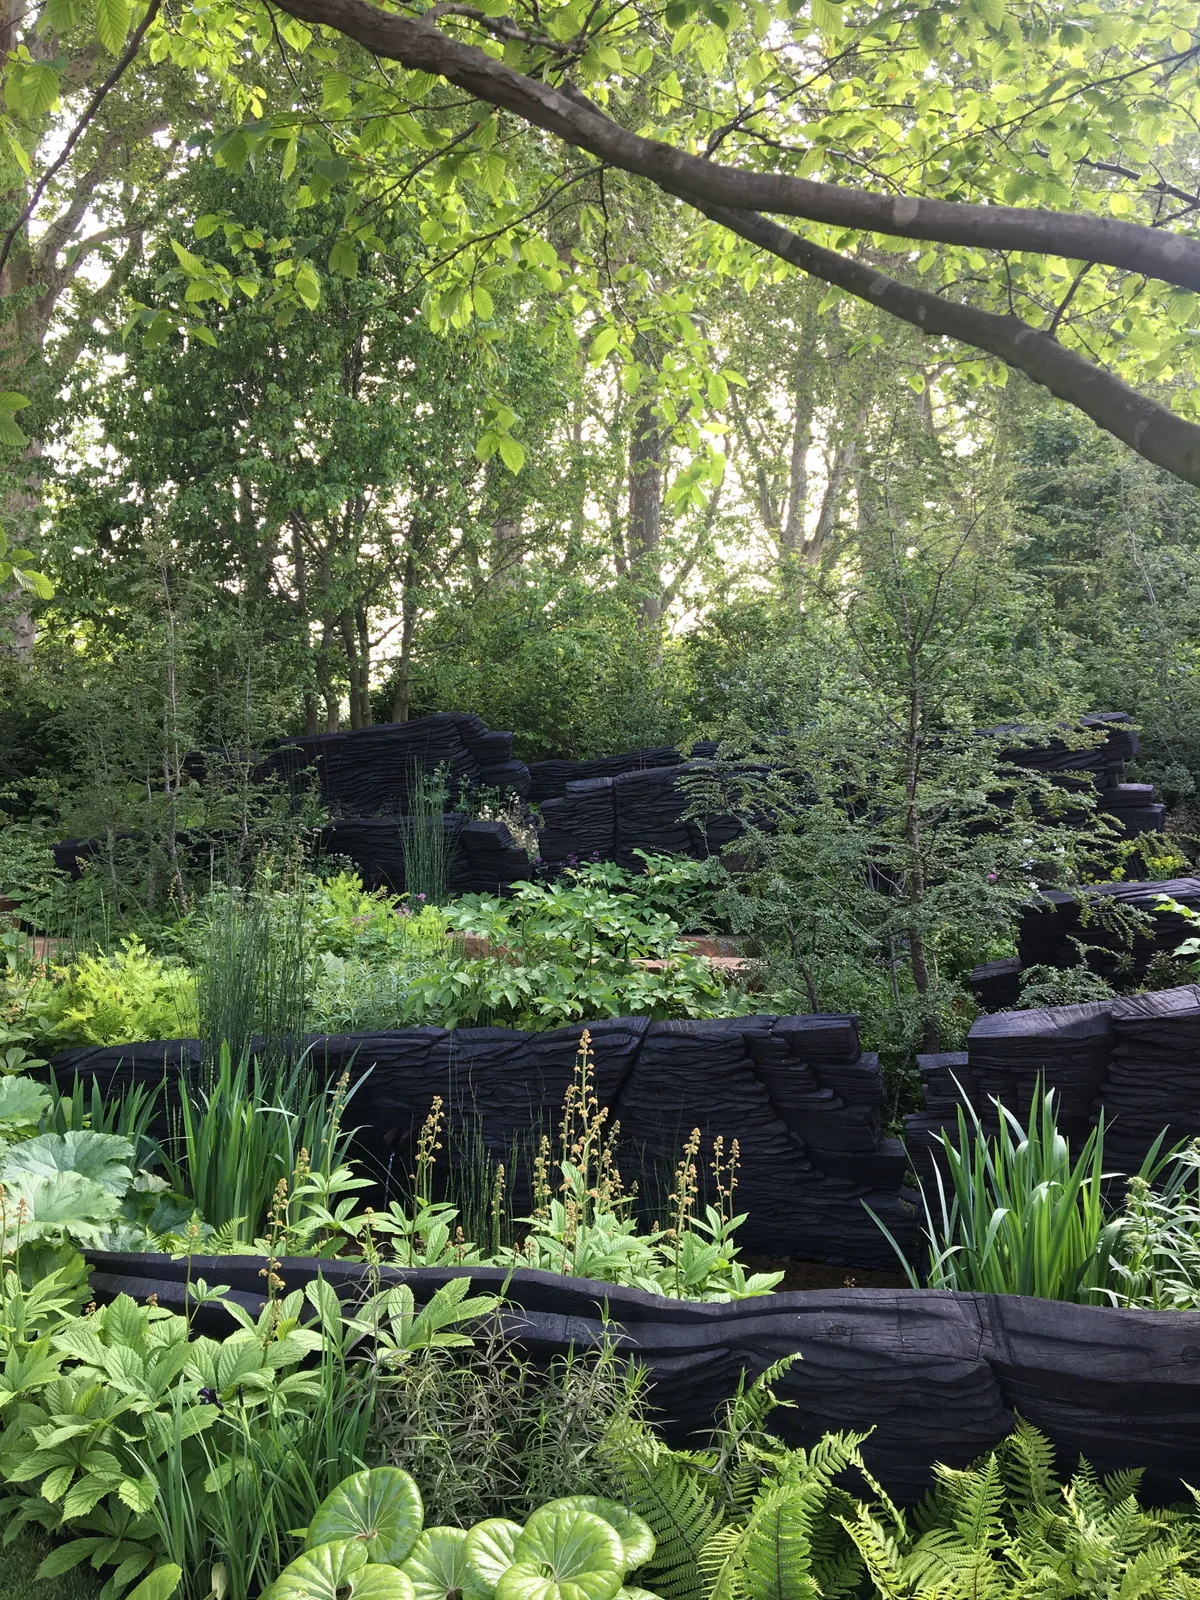 THE M&G Garden designed by Andy Sturgeon